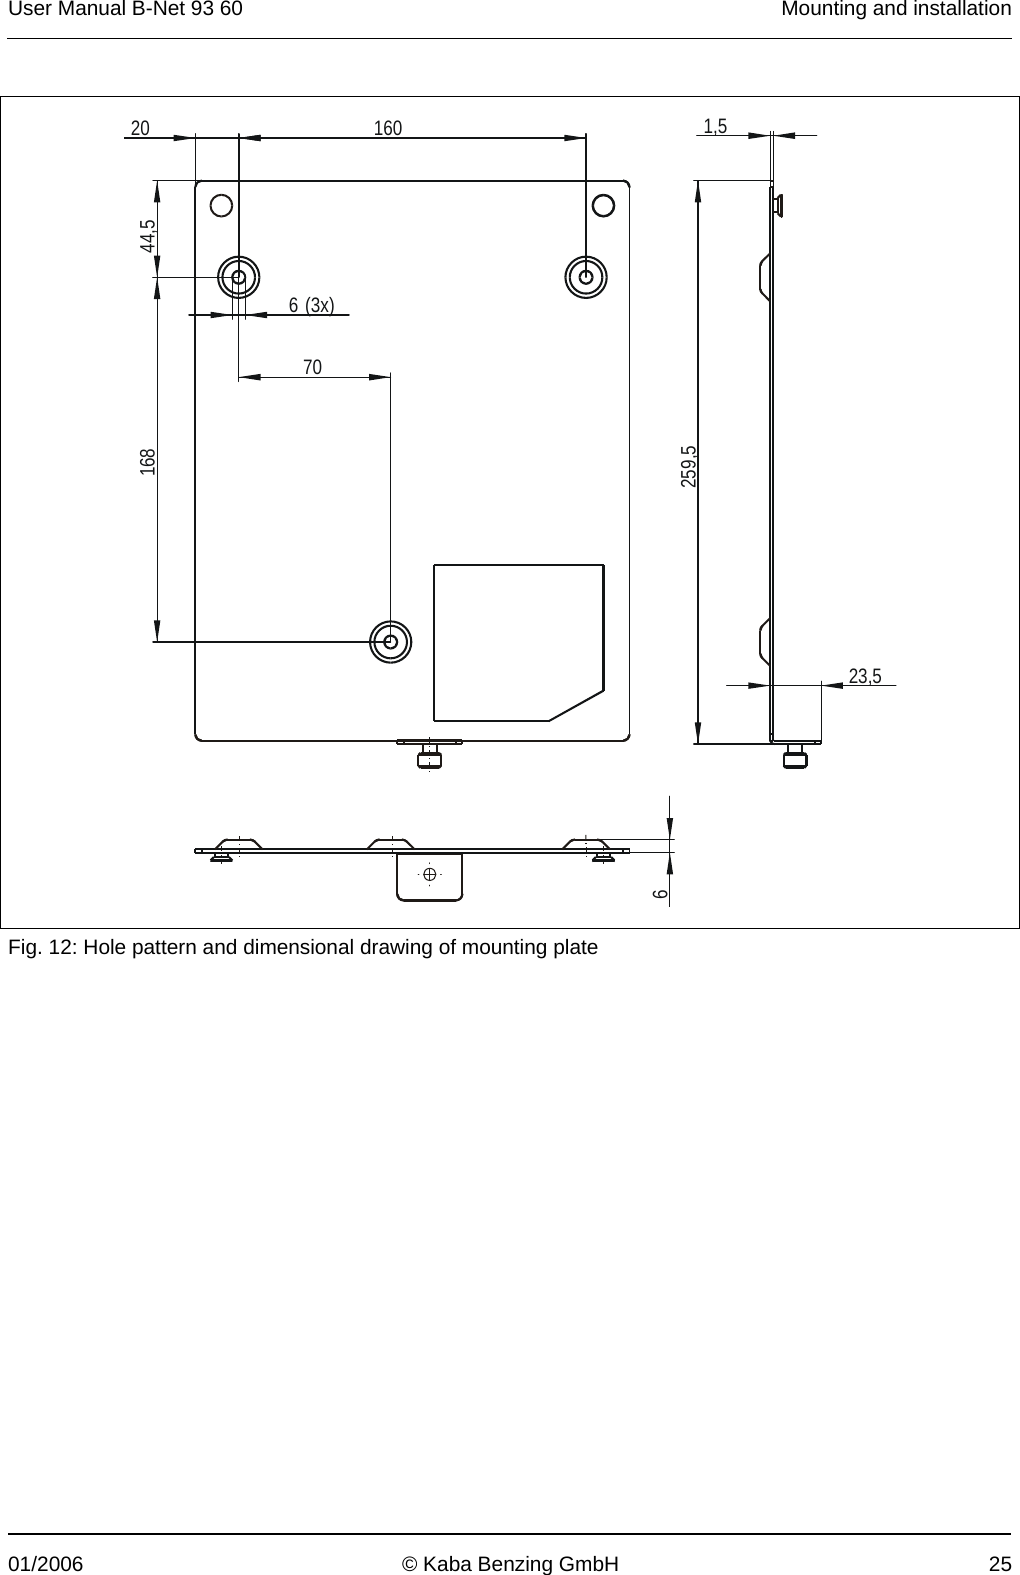 User Manual B-Net 93 60   Mounting and installation  01/2006  © Kaba Benzing GmbH  25     23,5259,51,5620 16044,51686 (3x)70 Fig. 12: Hole pattern and dimensional drawing of mounting plate 